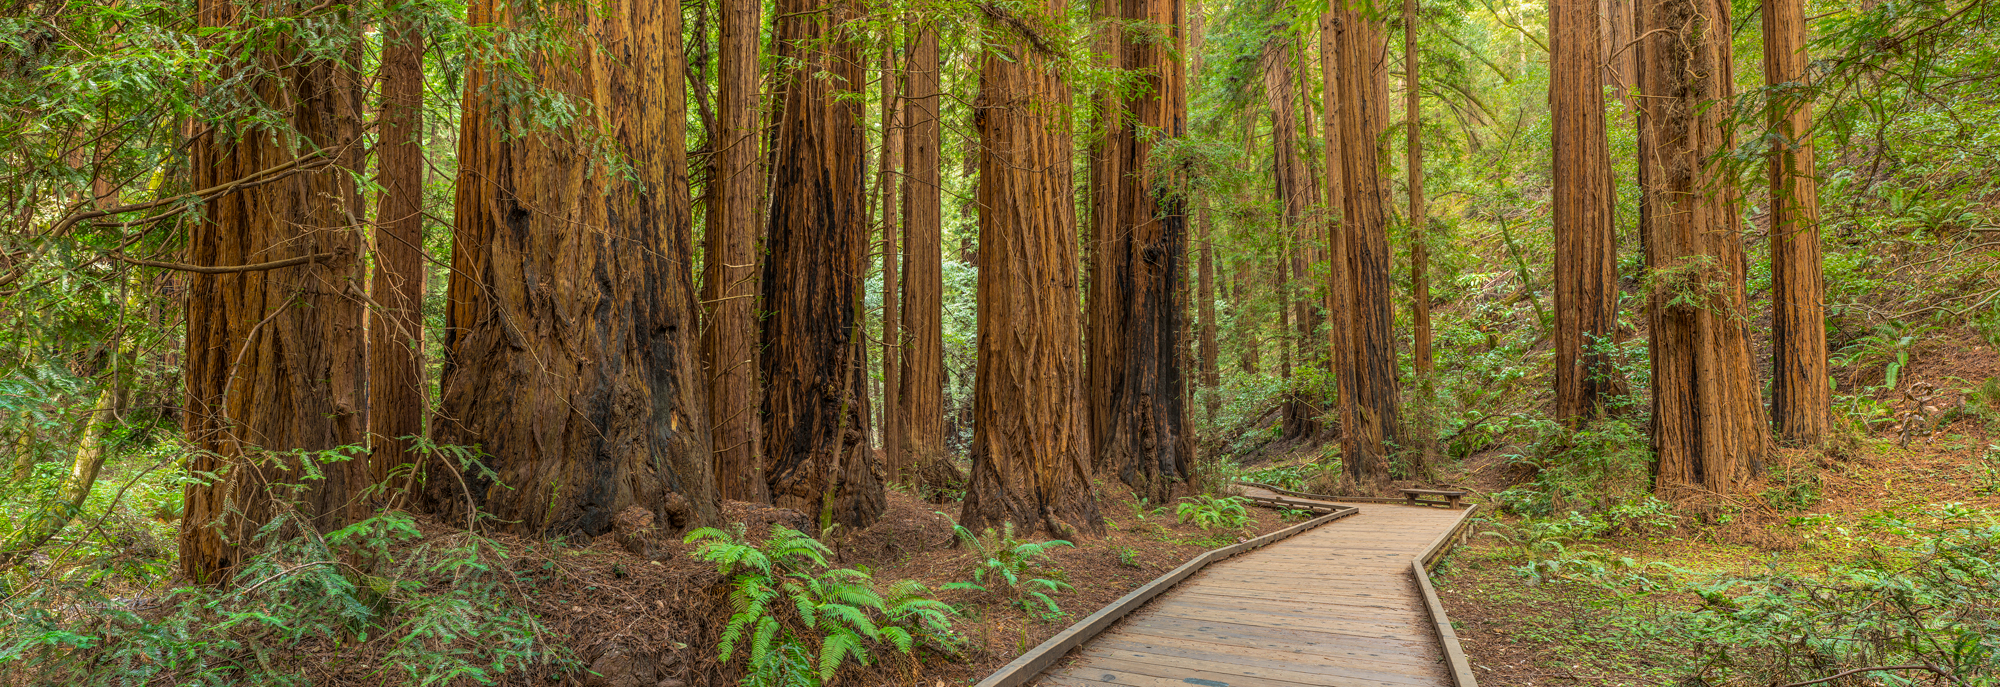 Muir Woods National Monument Marin County Redwoods Panorama Fine Art Landscape Photography Mark Lilly